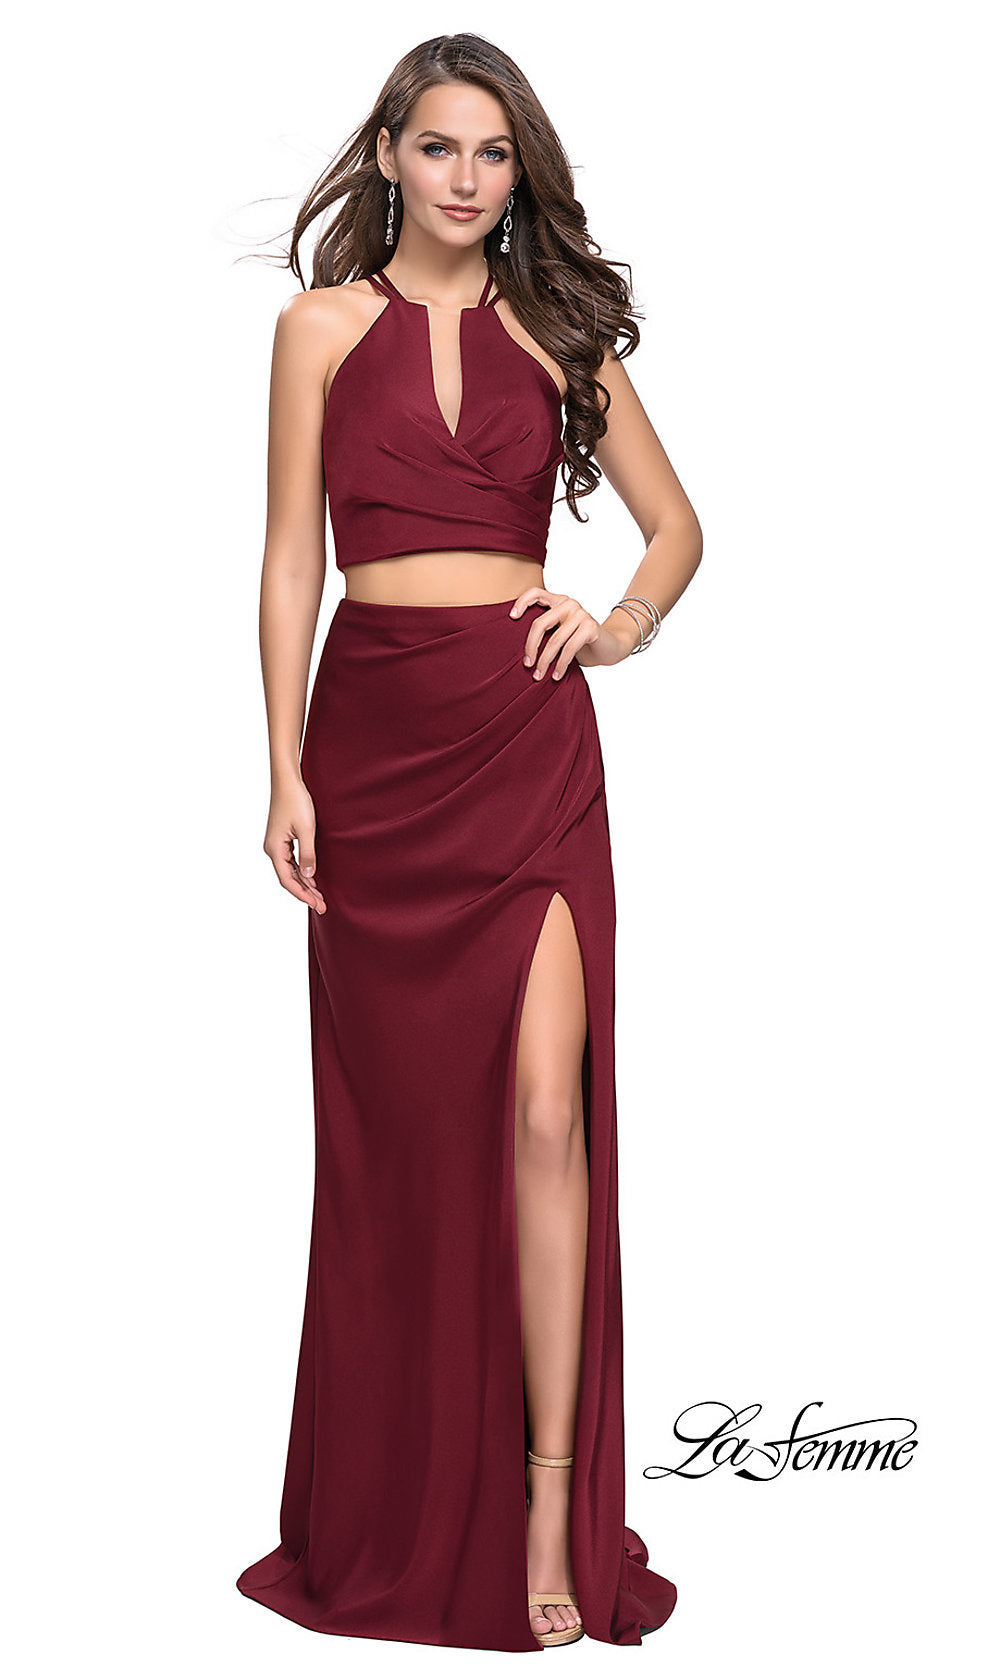 La Femme-Long Two-Piece Prom Dress with Ruching